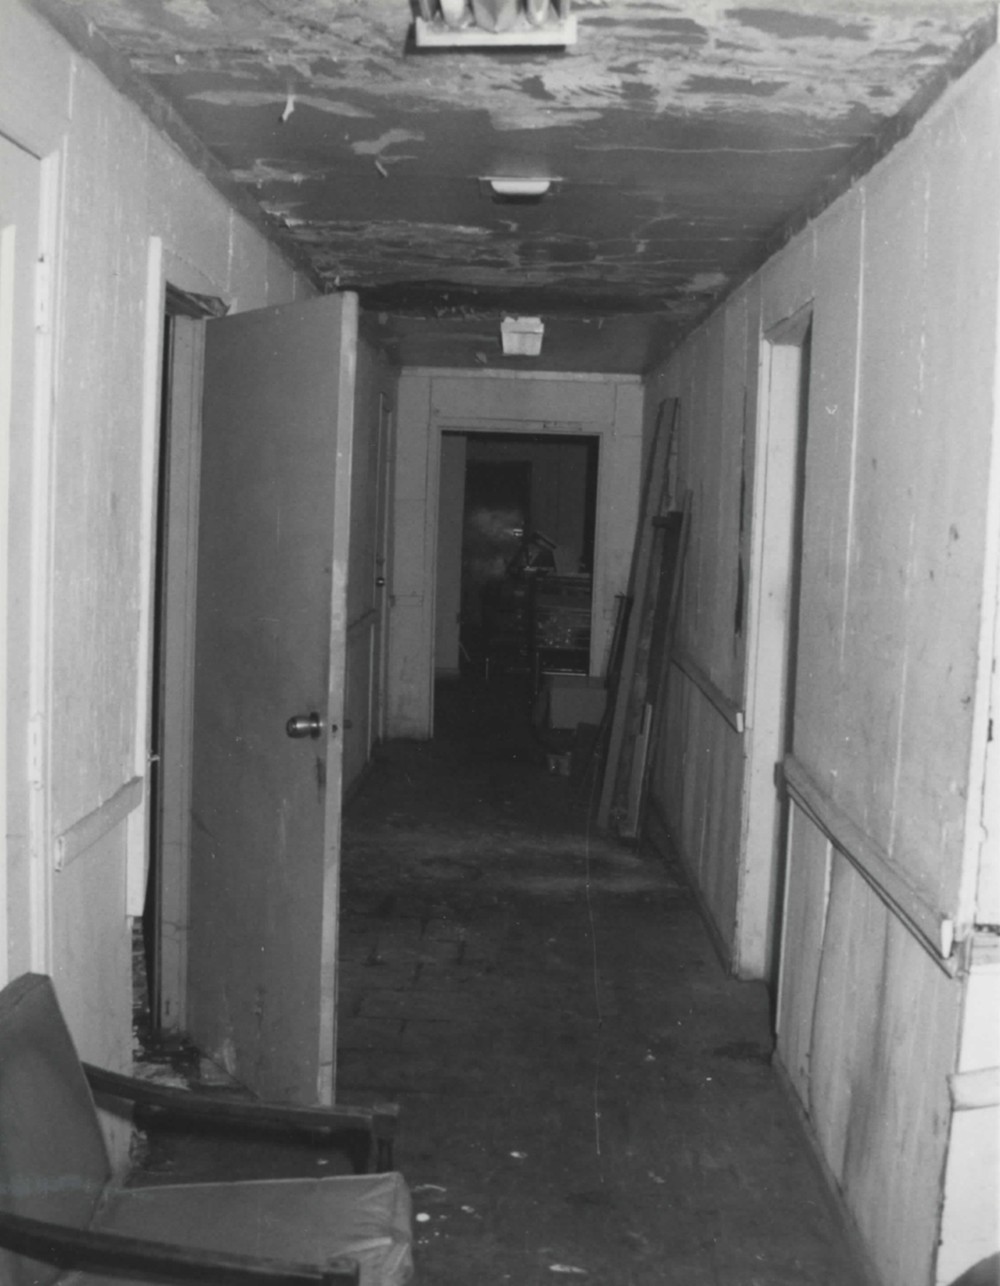 Marting Hotel, Ironton Ohio Back hallway to alley exit - first floor (1998)